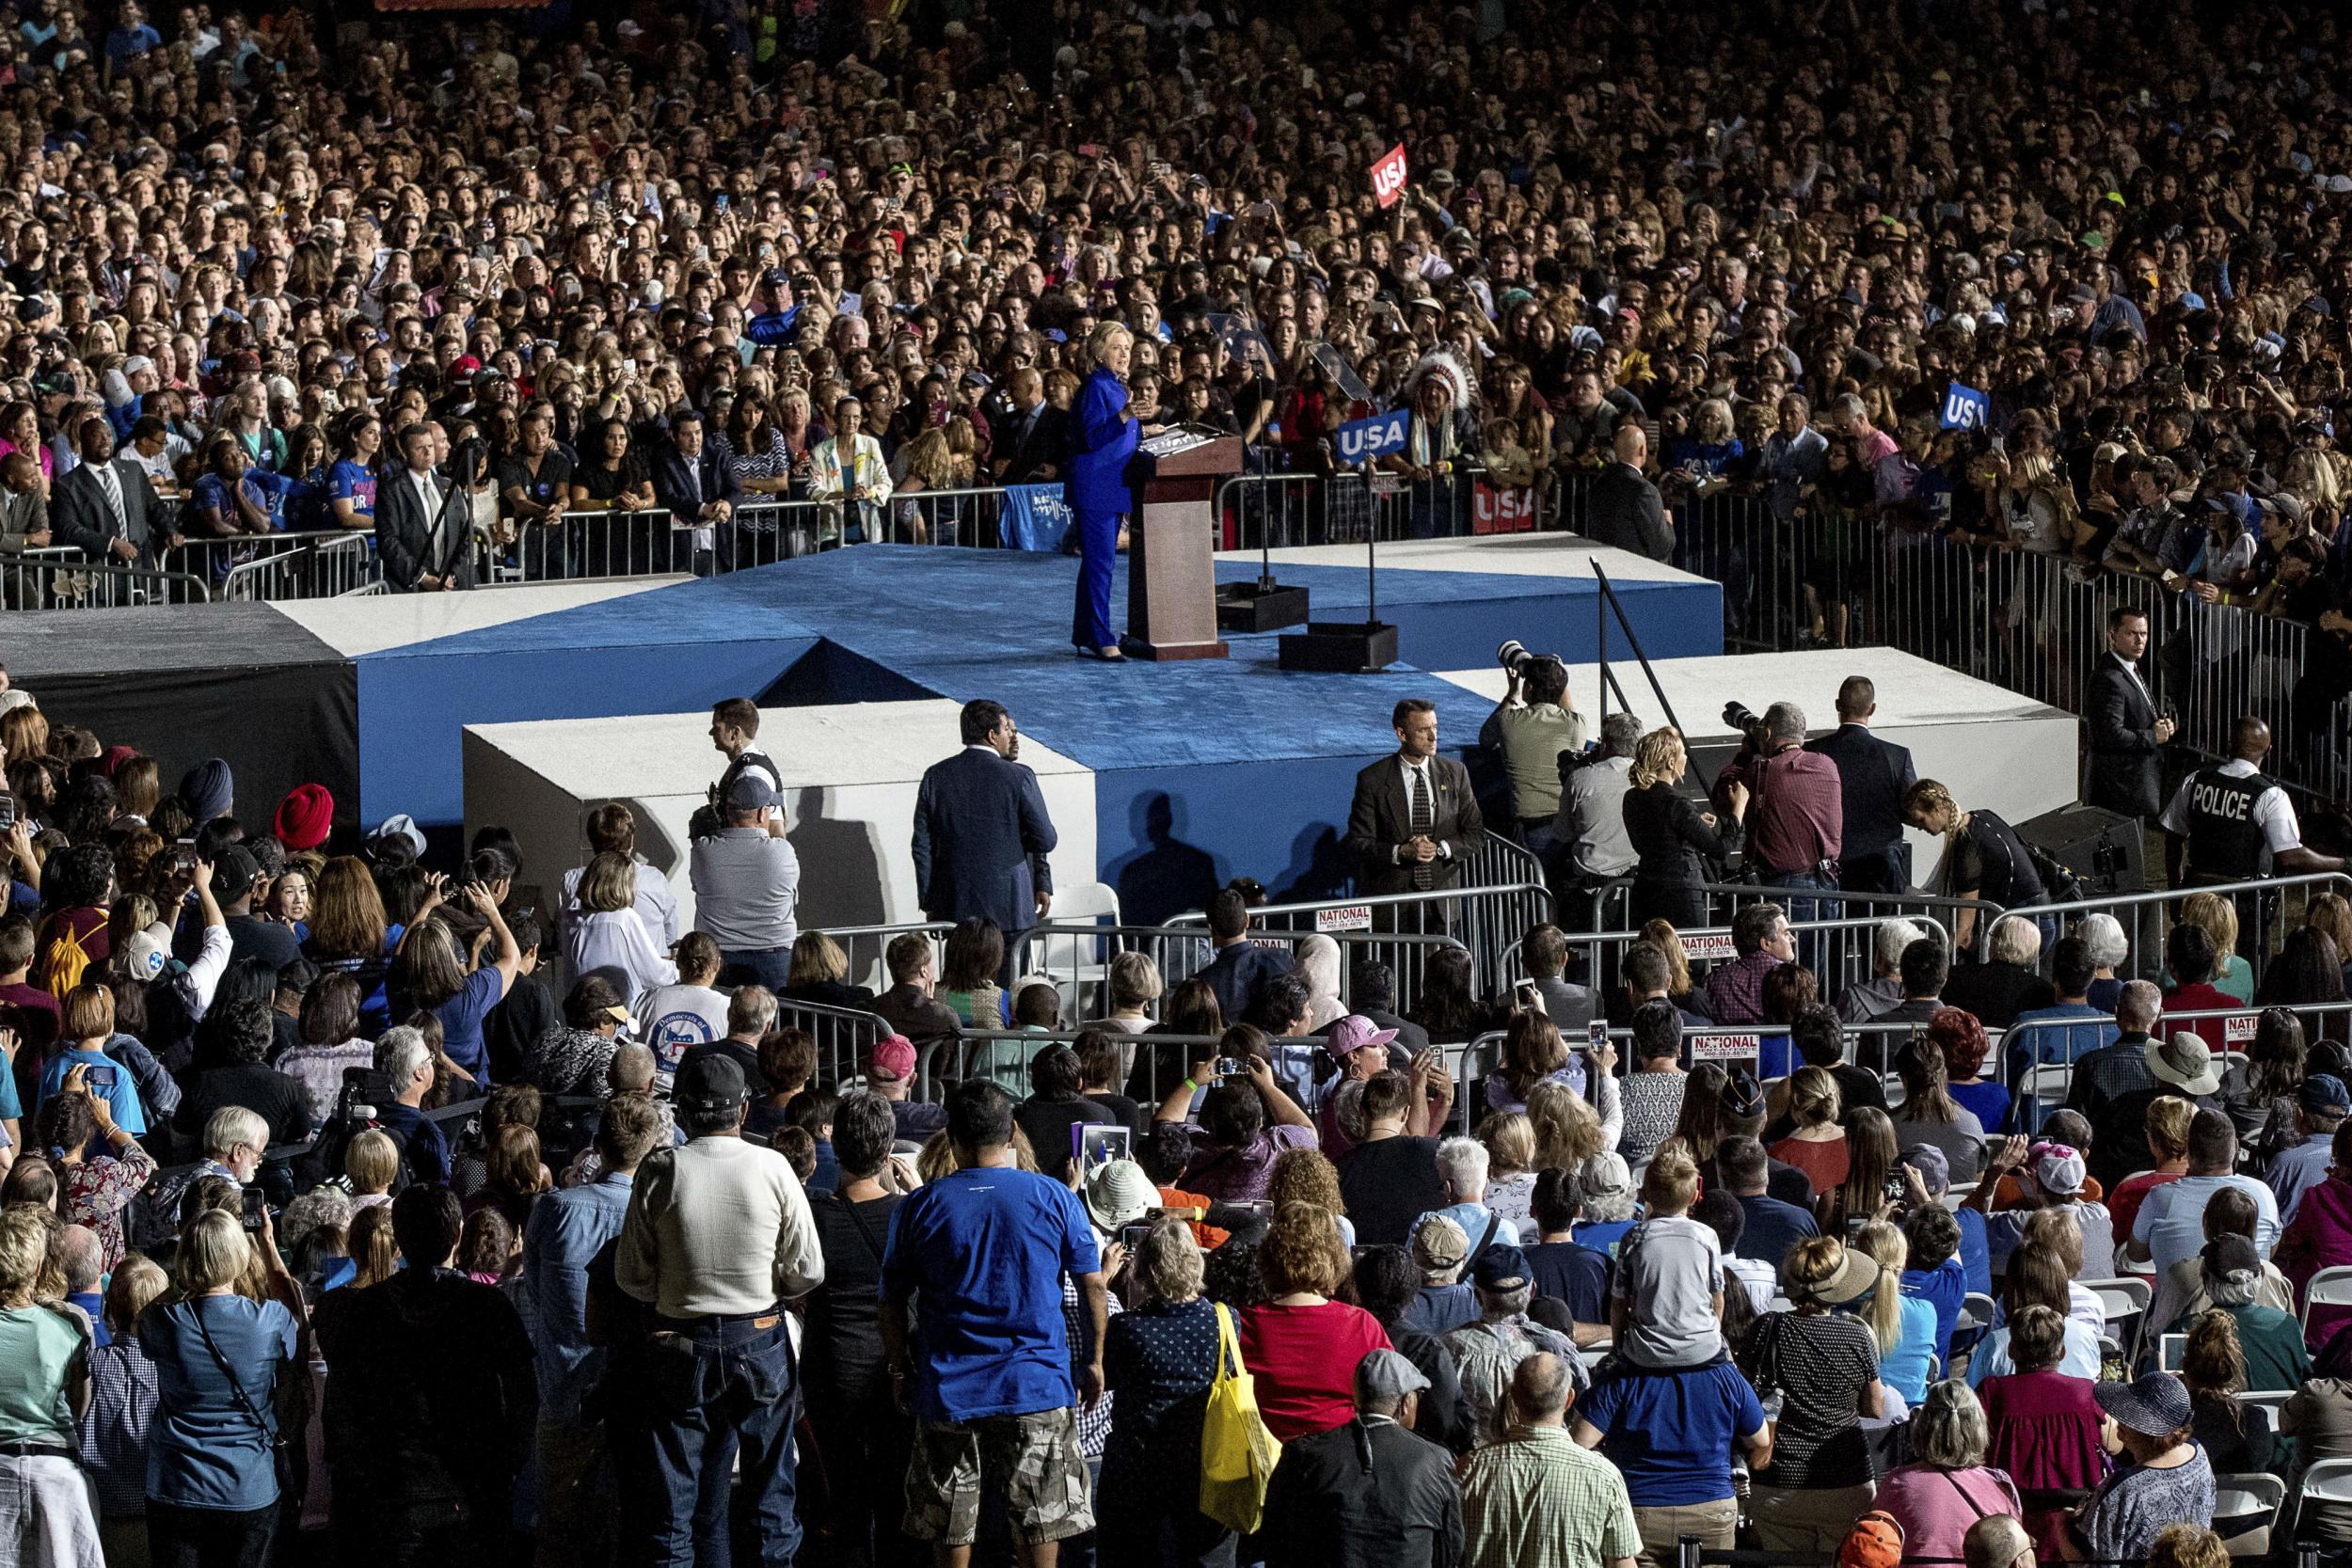 Ms Clinton addressing one of the biggest crowds of her campaign at Arizona State University on Wednesday